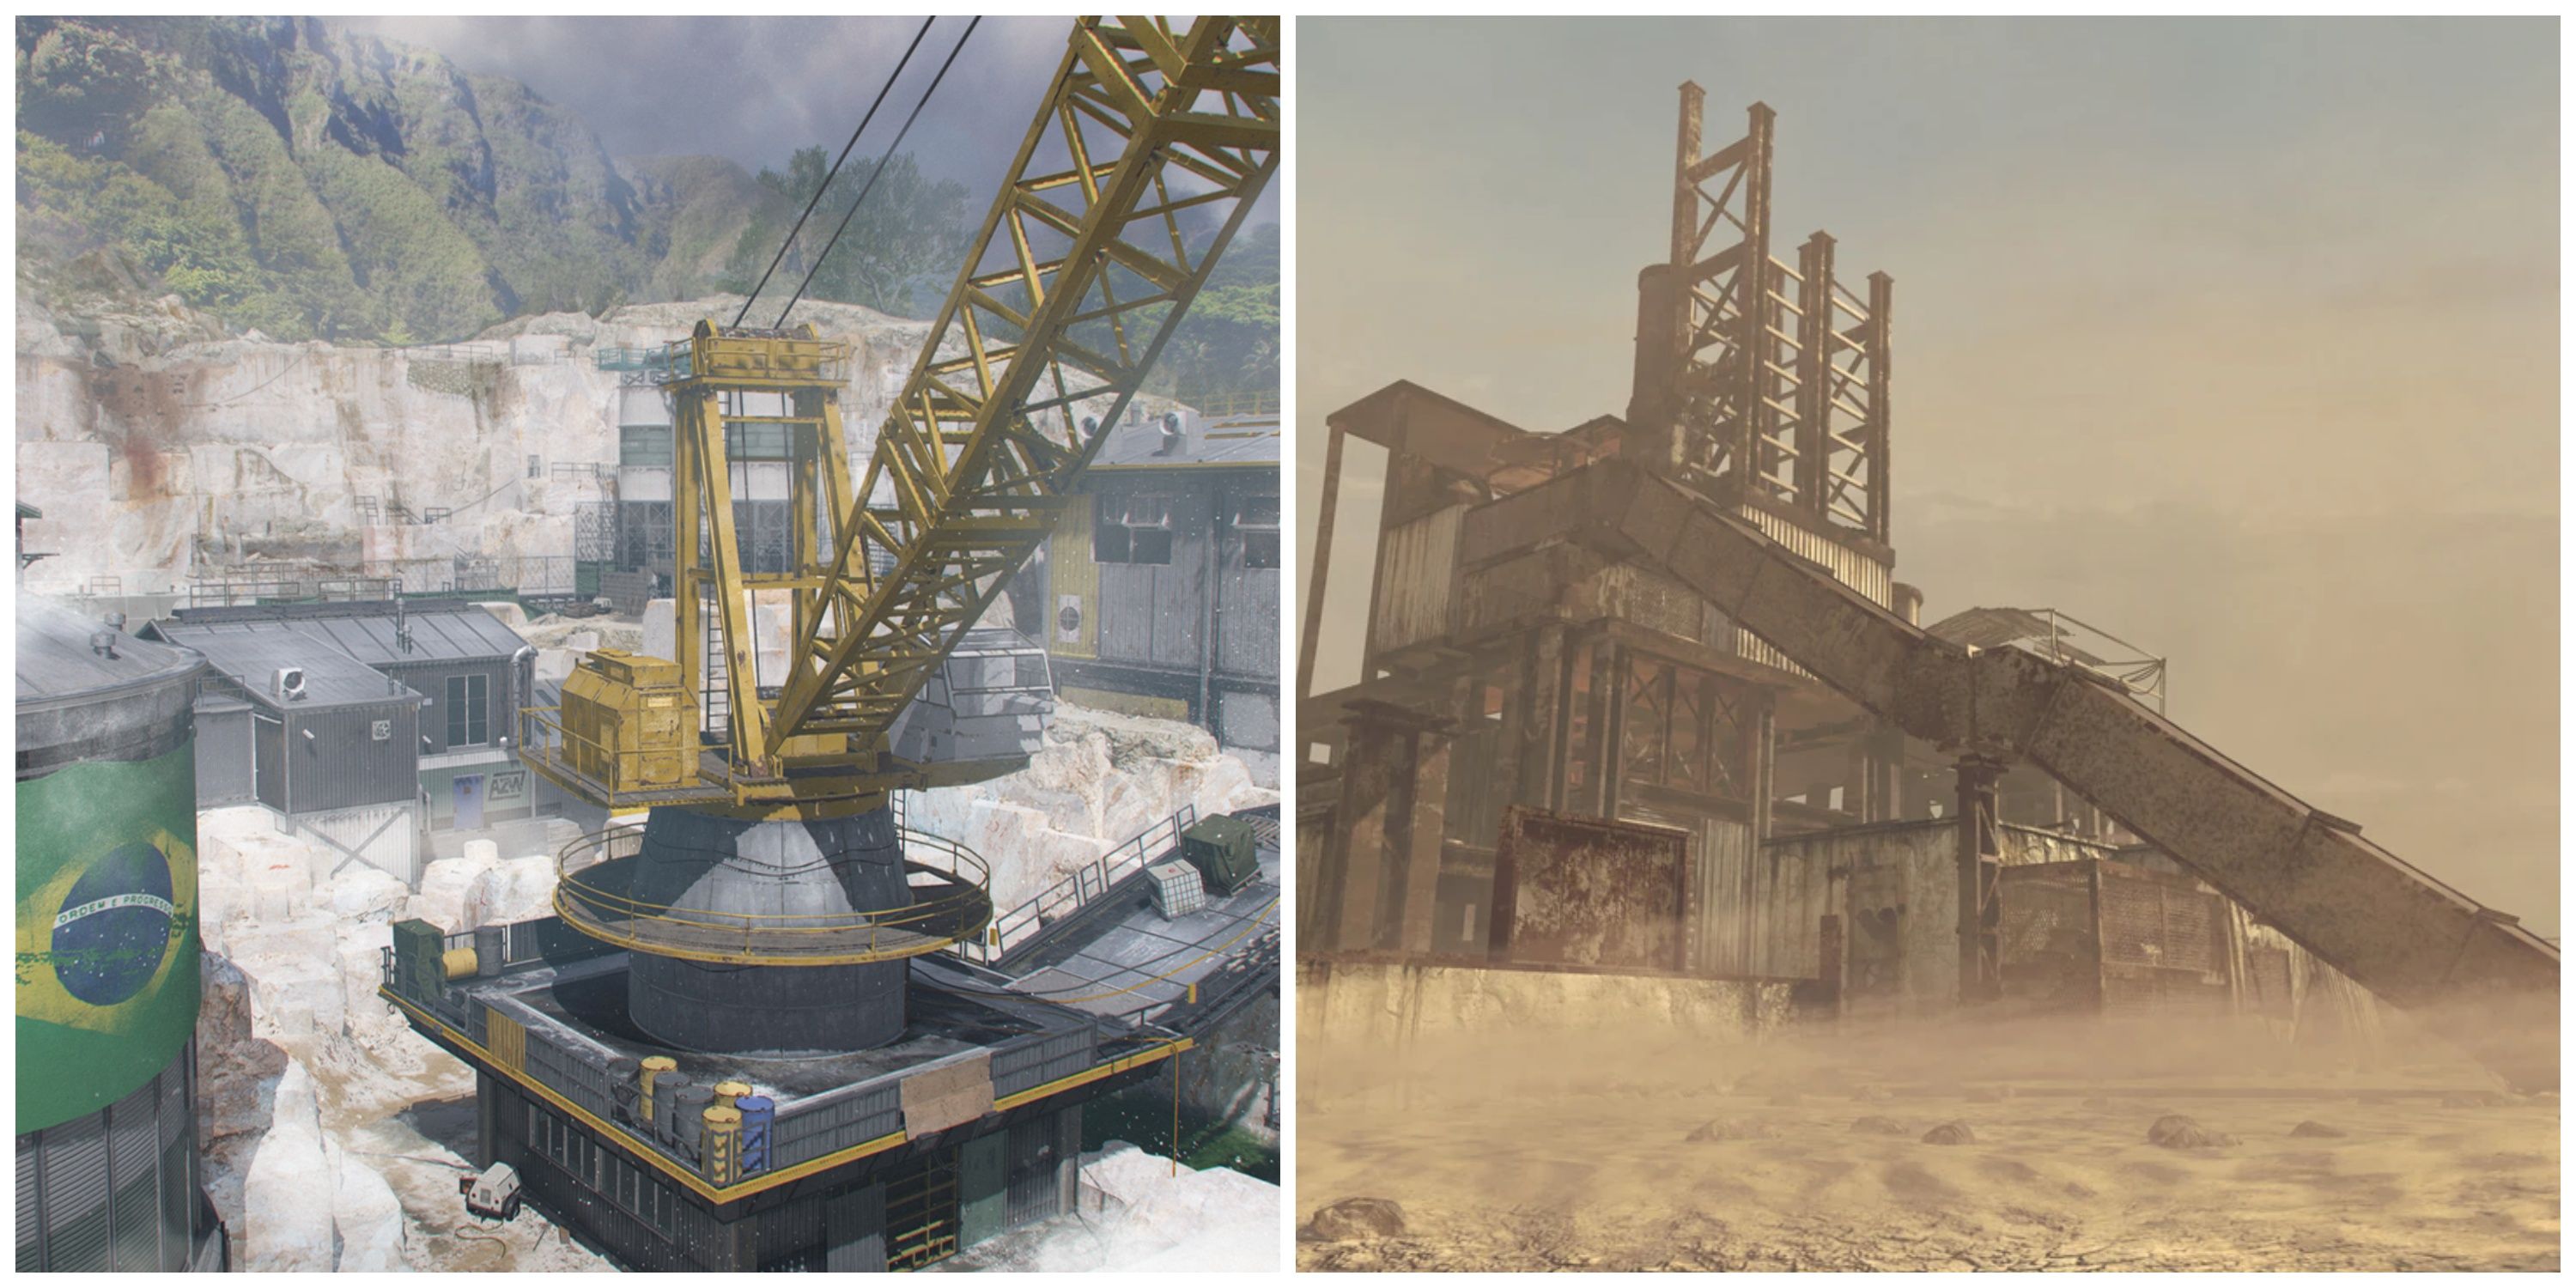 quarry and rust in mw3